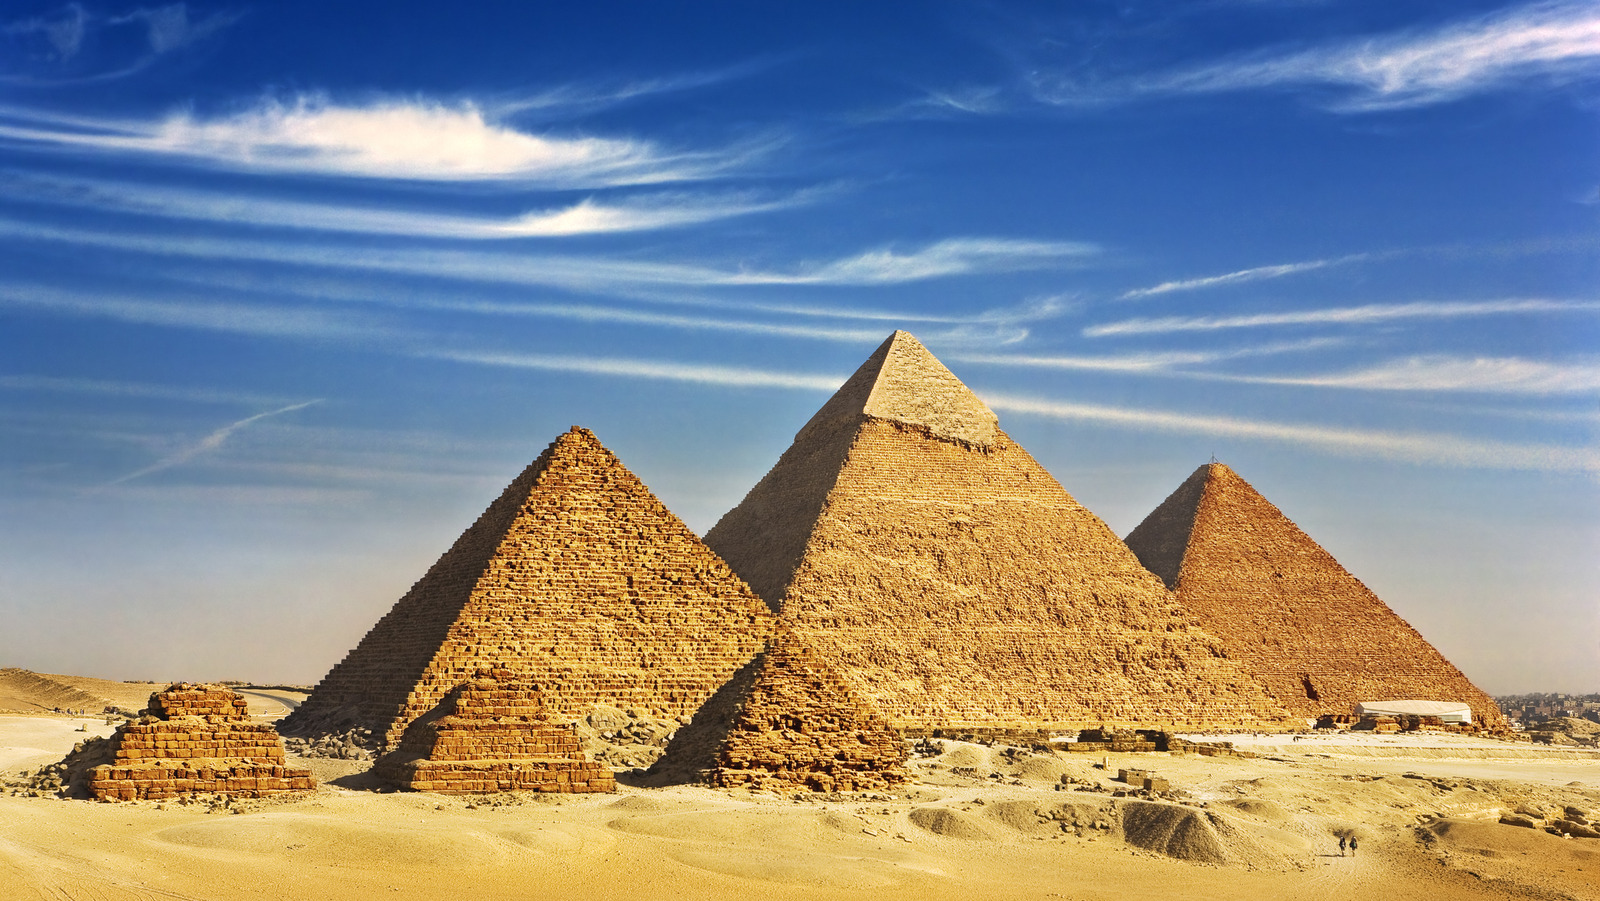 Yes, You Can Explore Inside The Pyramids Of Giza (And Here’s What You’ll See) – Explore